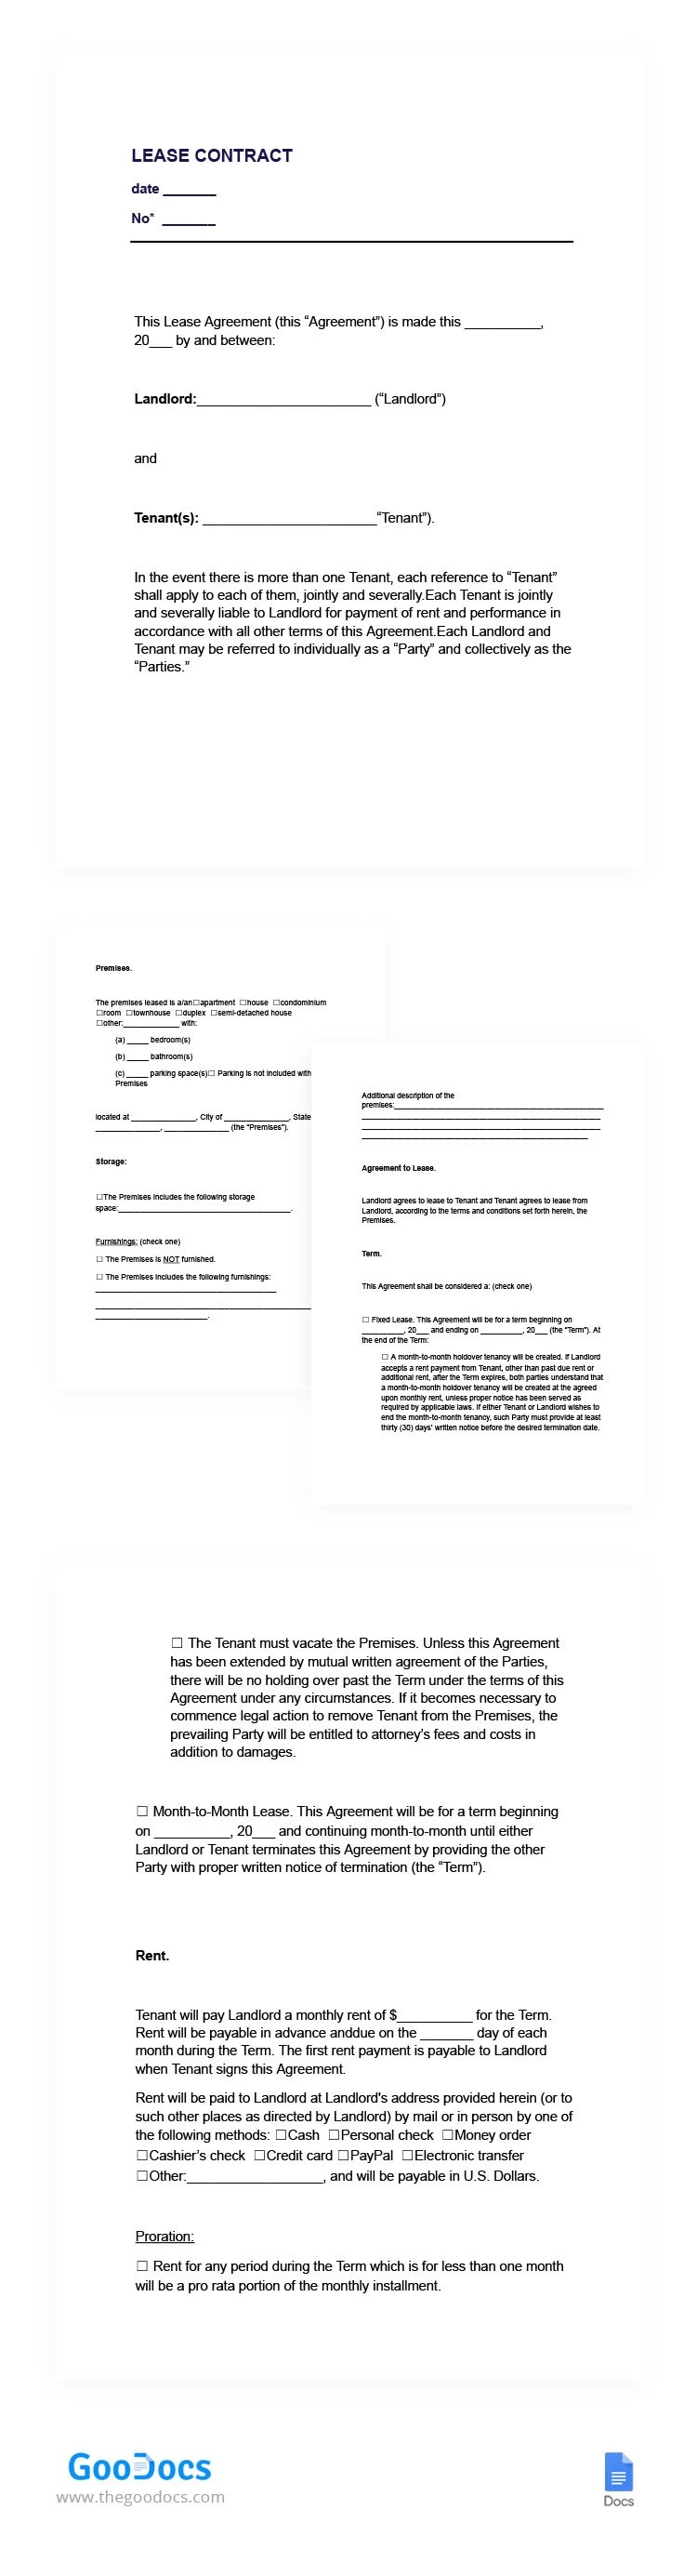 Lease Contract - free Google Docs Template - 10065727